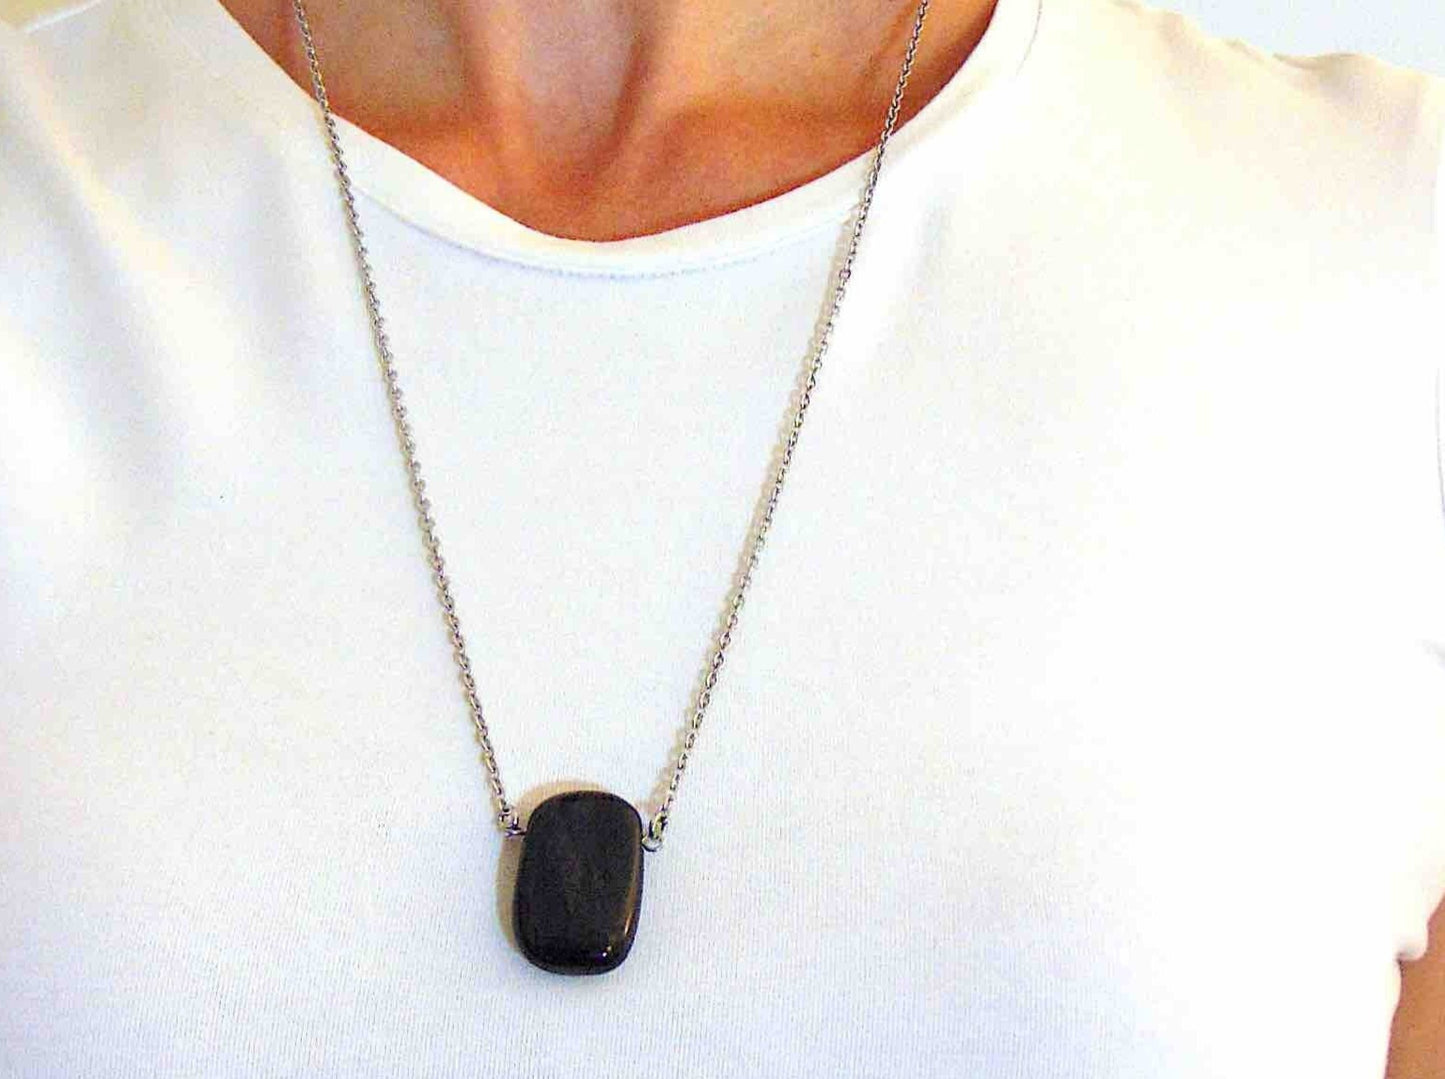 26-inch necklace with rectangular reddish gold obsidian stone pendant, stainless steel chain